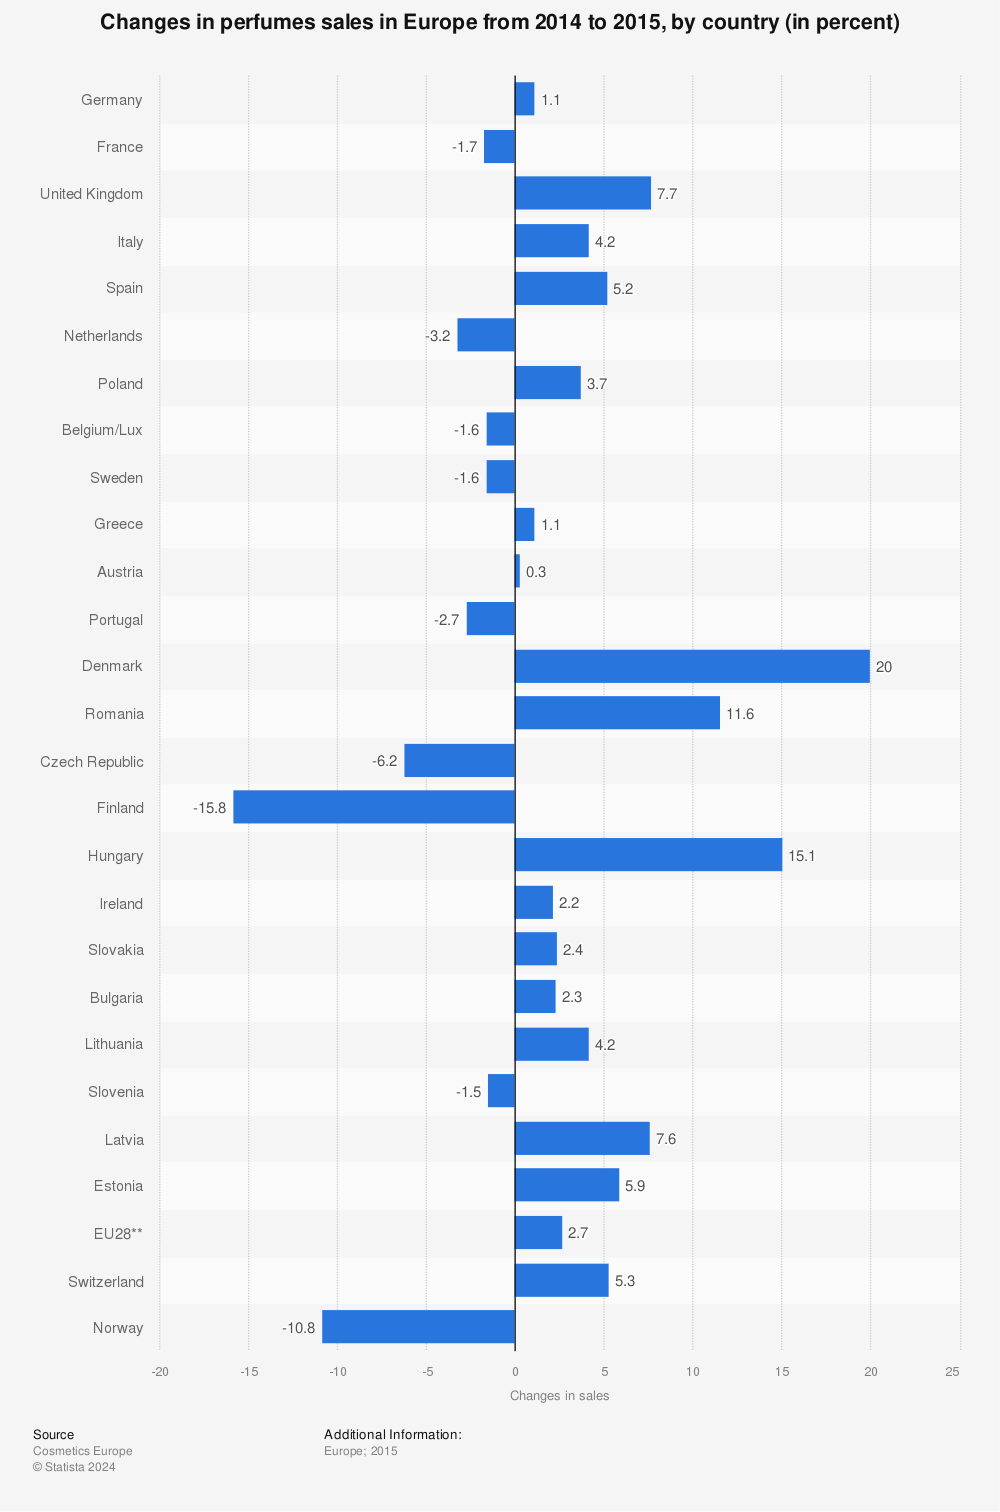 Statistic: Changes in perfumes sales in Europe from 2014 to 2015, by country (in percent) | Statista